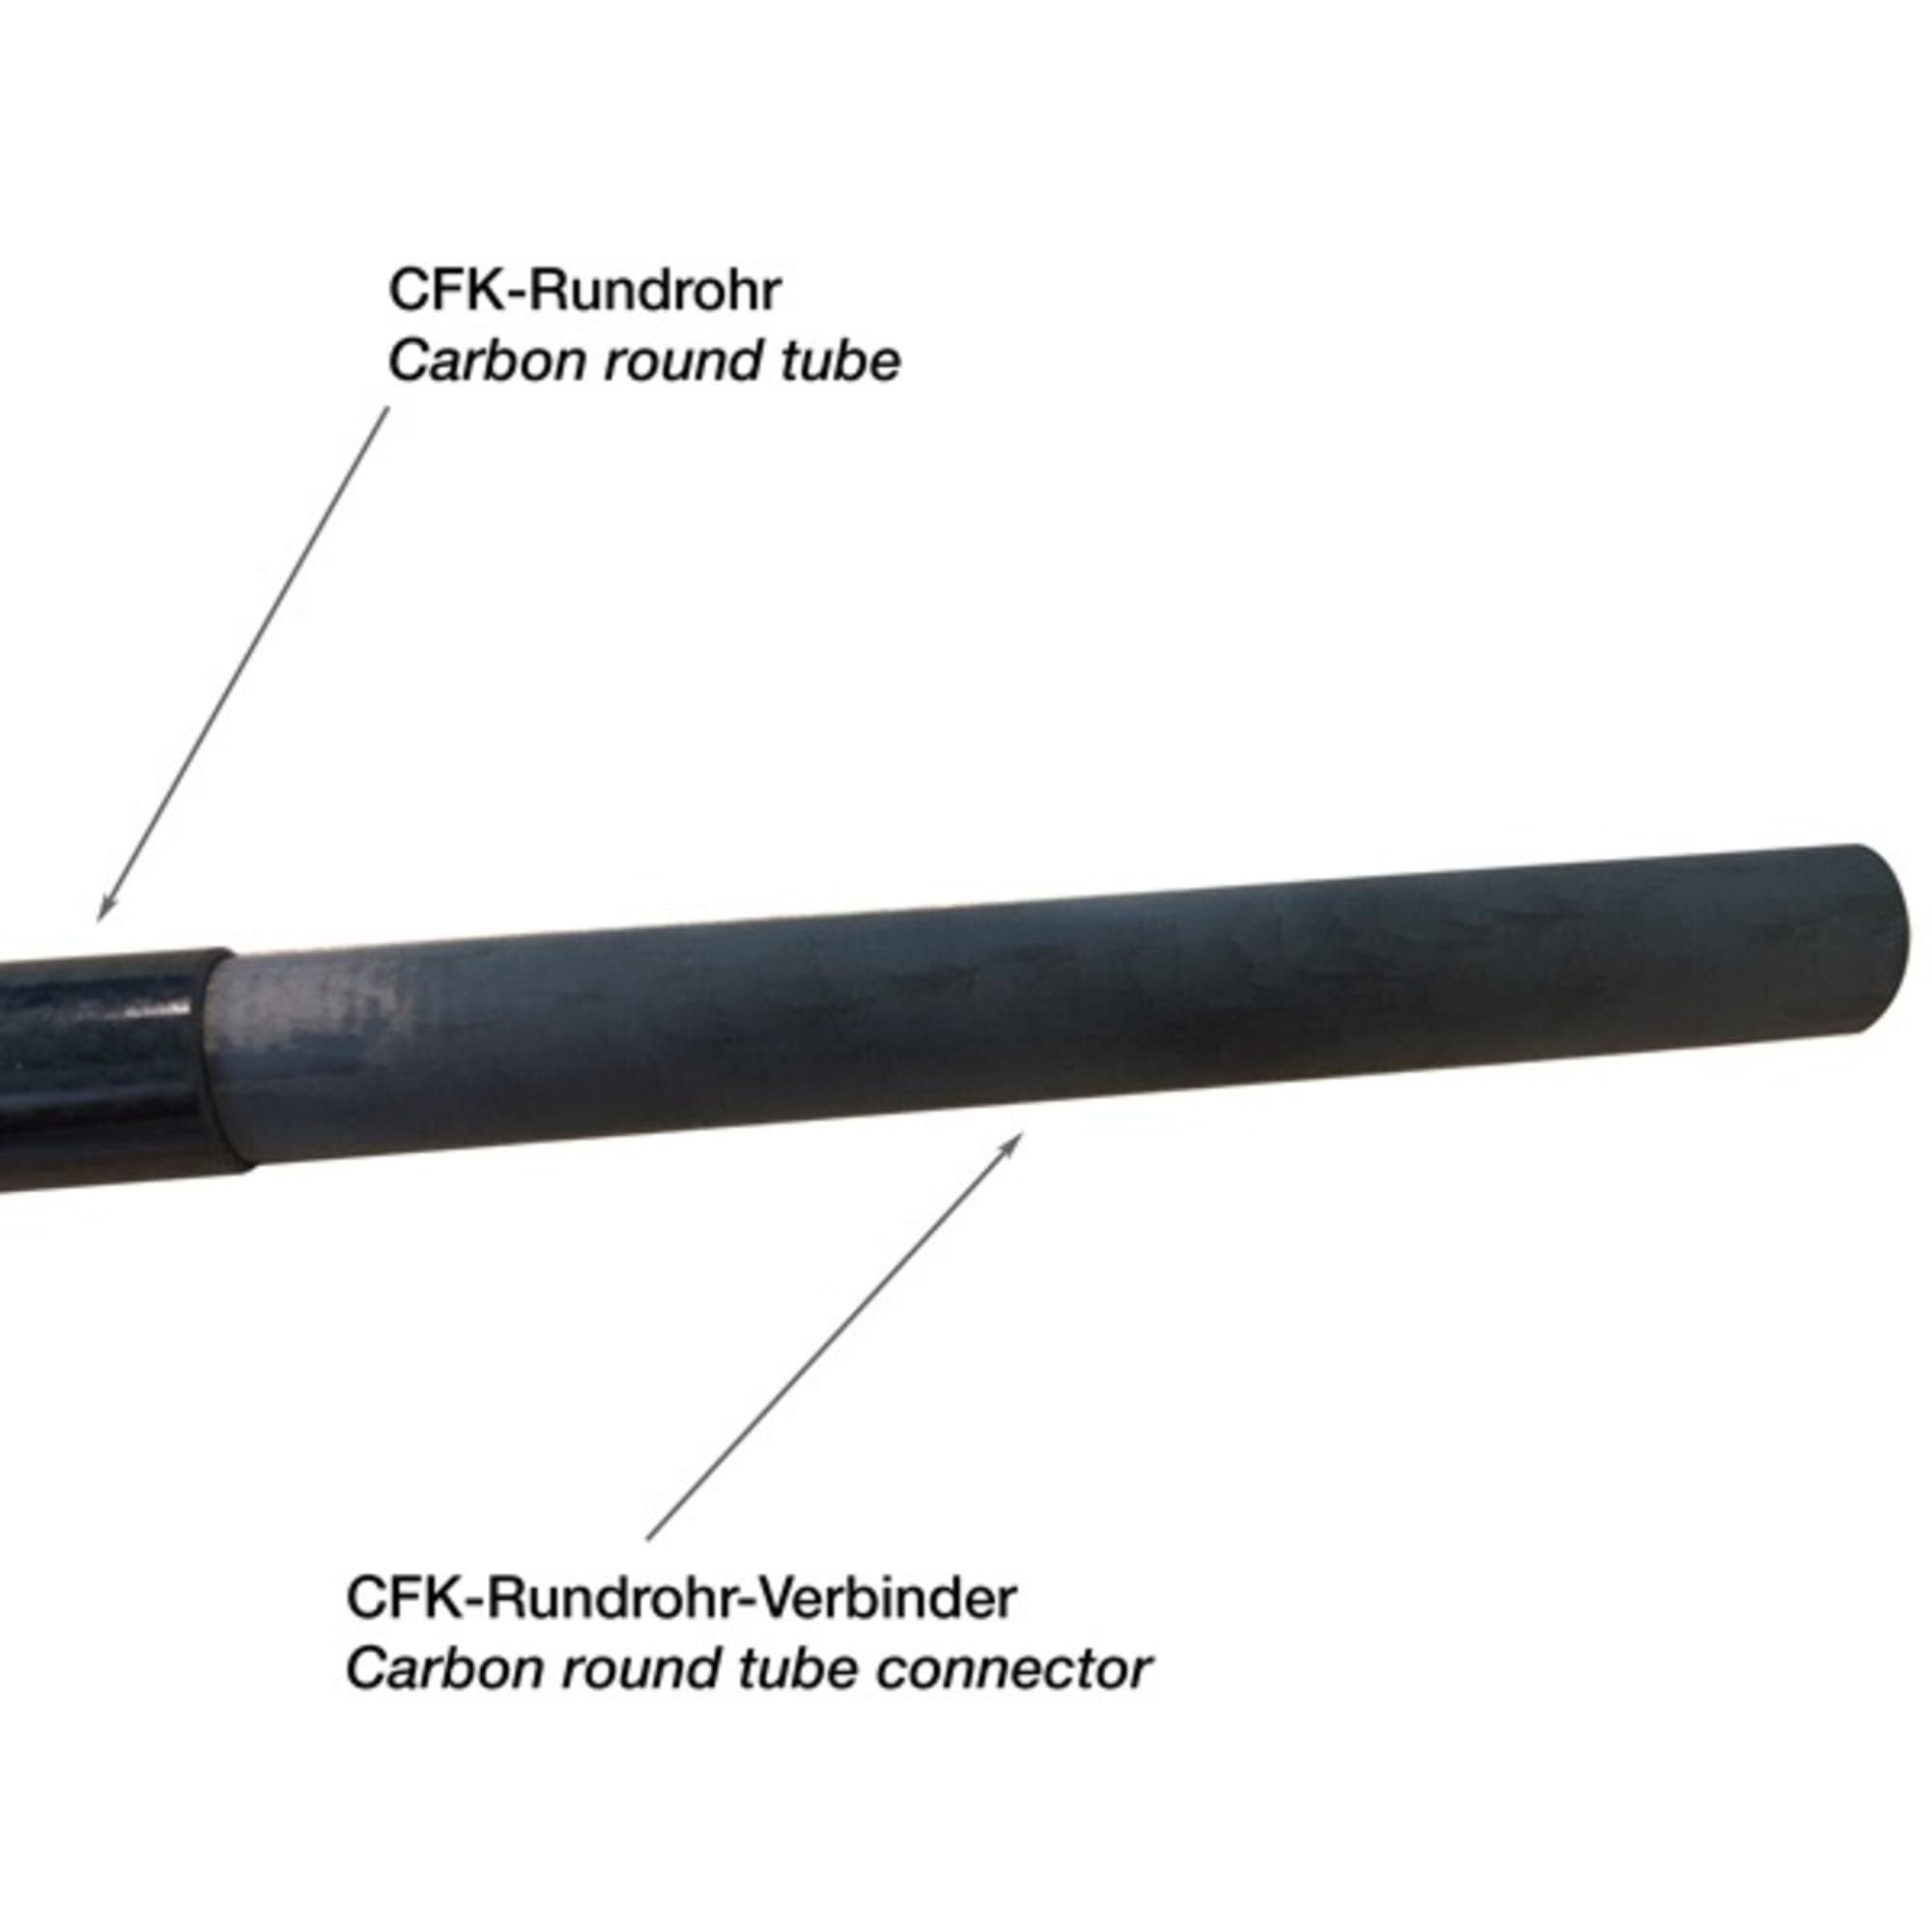 CARBON round tube connector for inner diameters of 18 and 28 mm, image 2